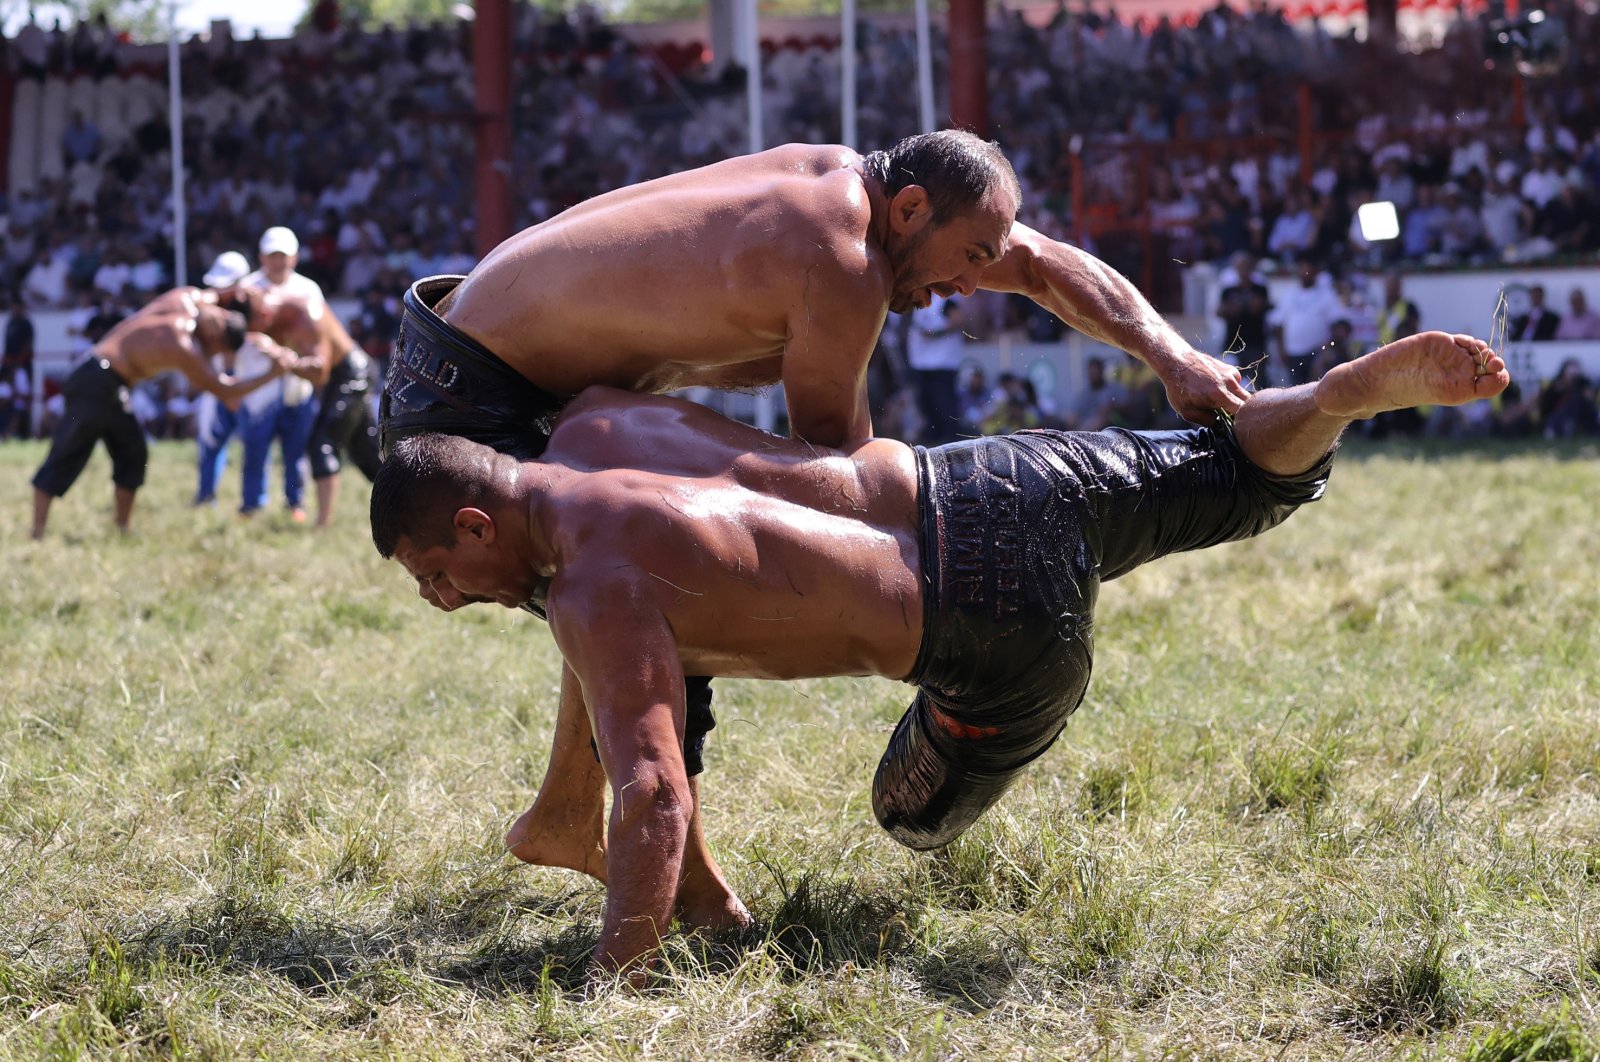 Wrestlers, doused in olive oil, wrestle each other during the 660th installment of the annual Historic Kırkpınar Oil Wrestling championship, in Edirne, northwestern Turkey, July 10, 2021. (AA Photo)